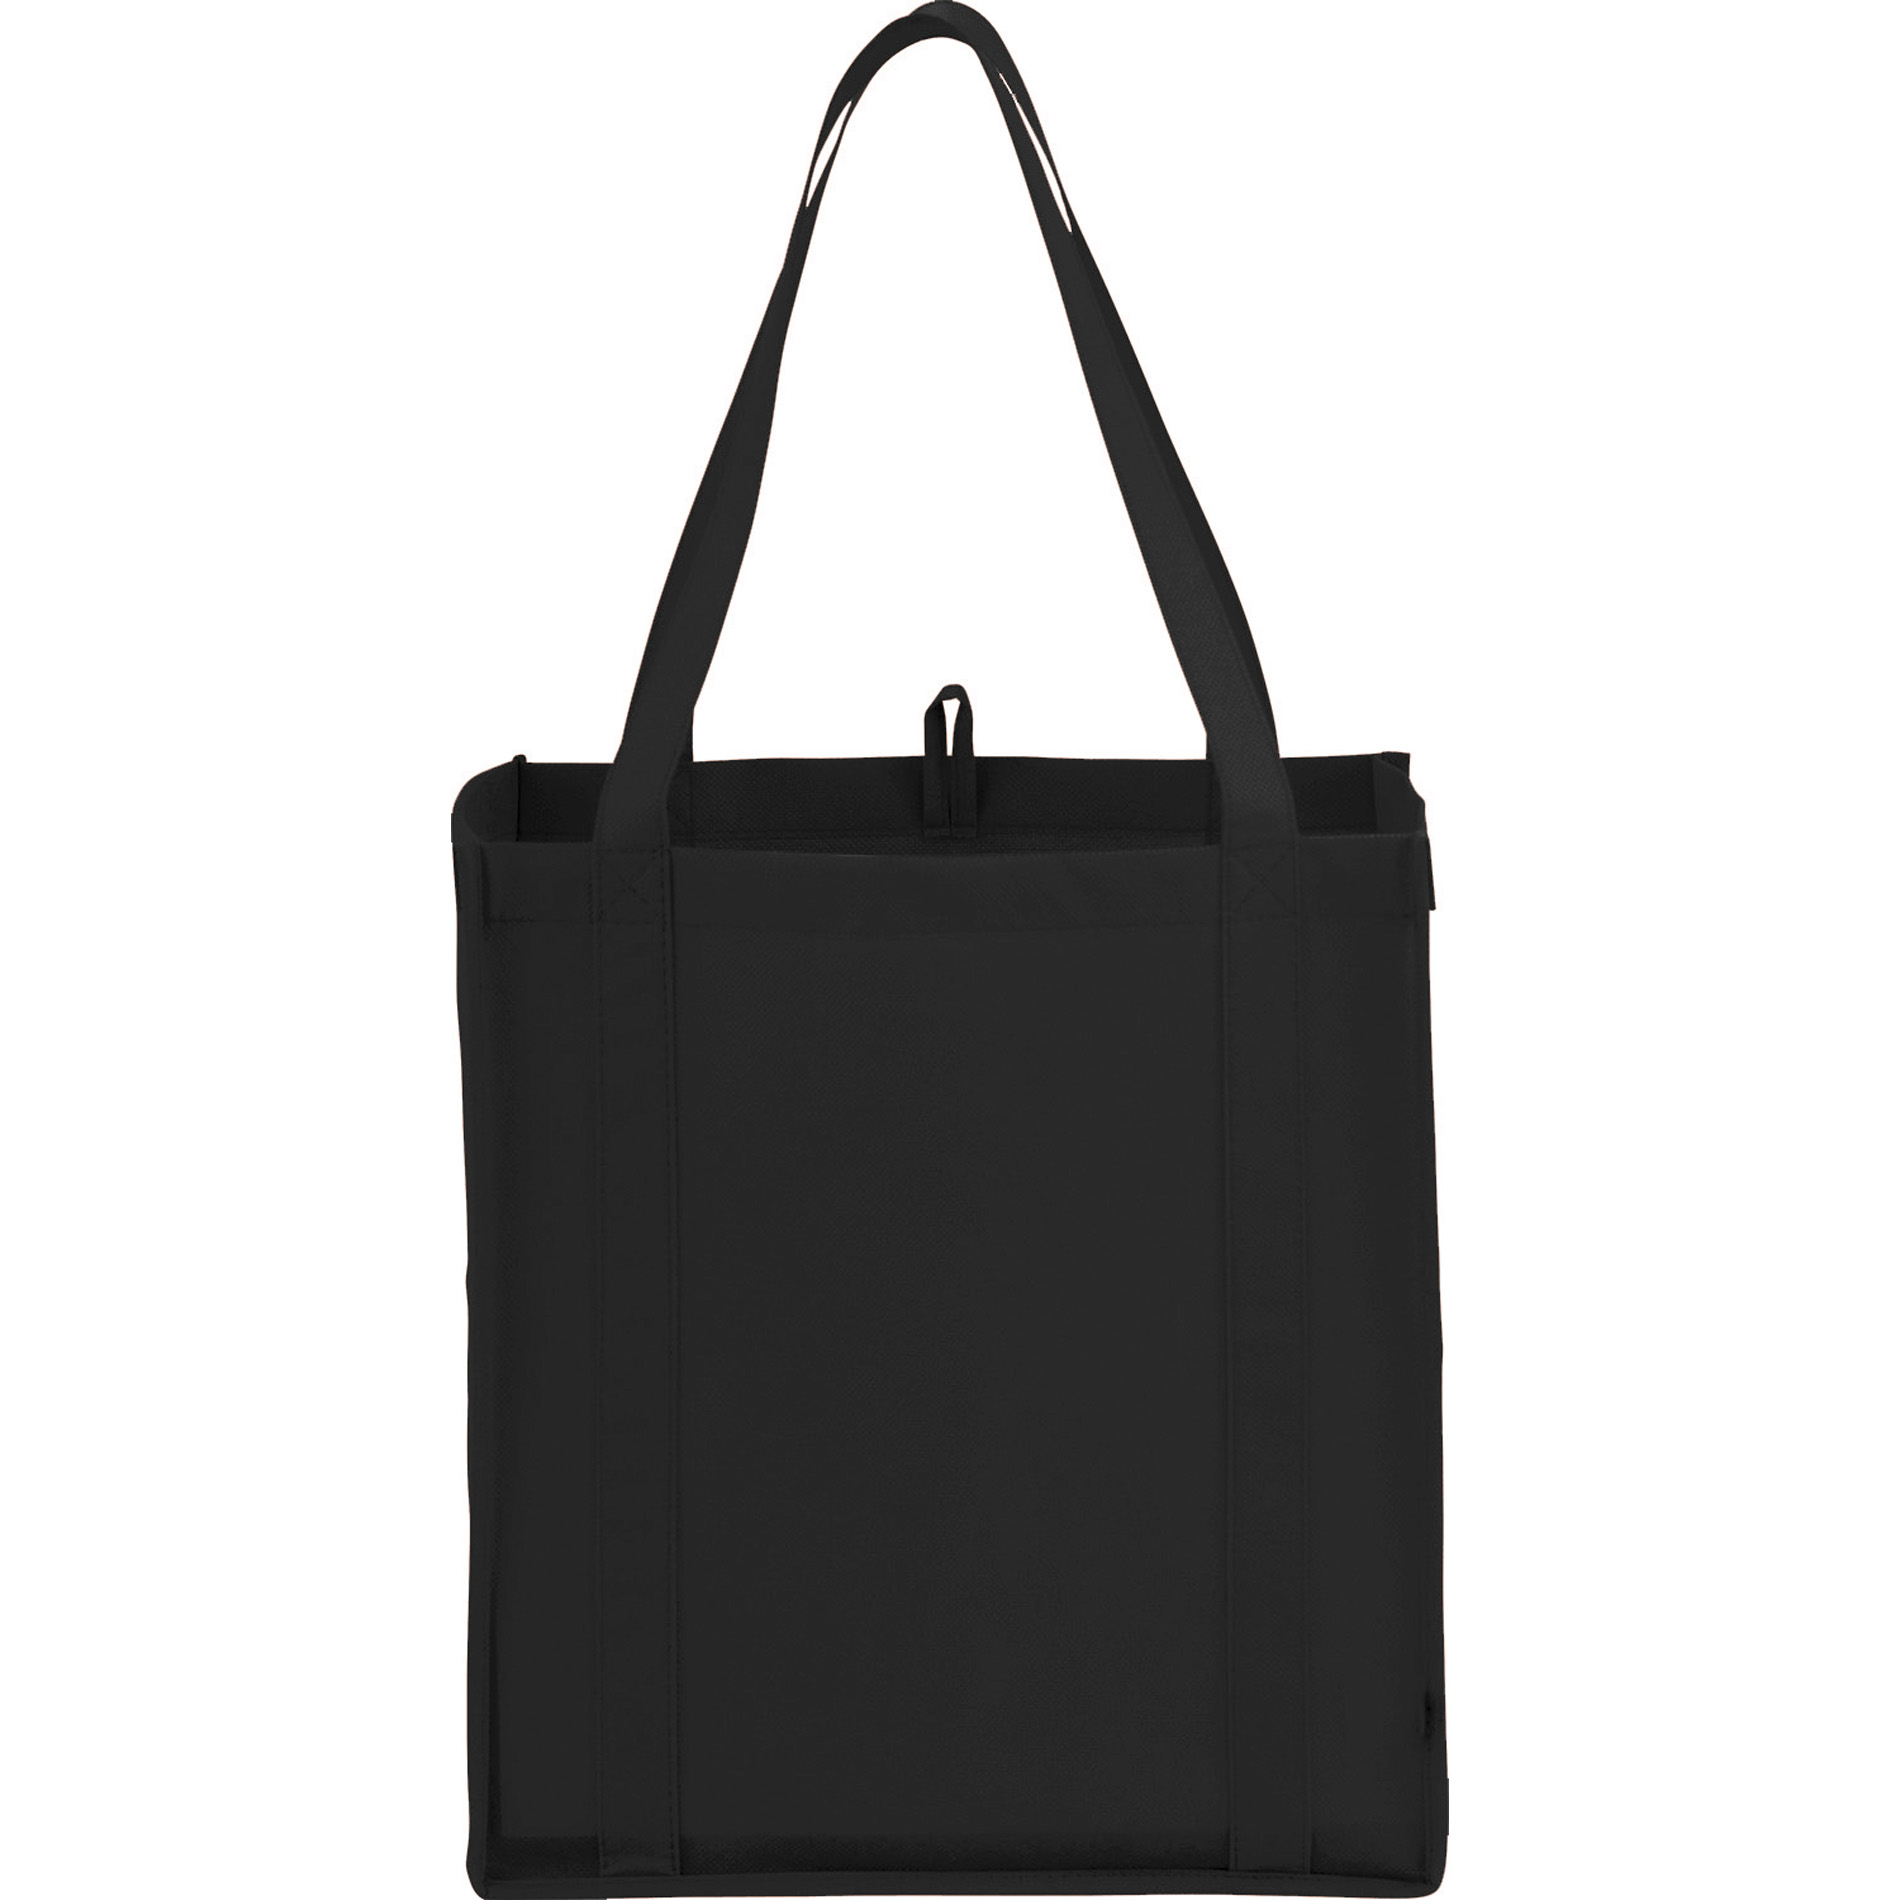 LEEDS 2150-01 - Little Grocery Non-Woven Tote